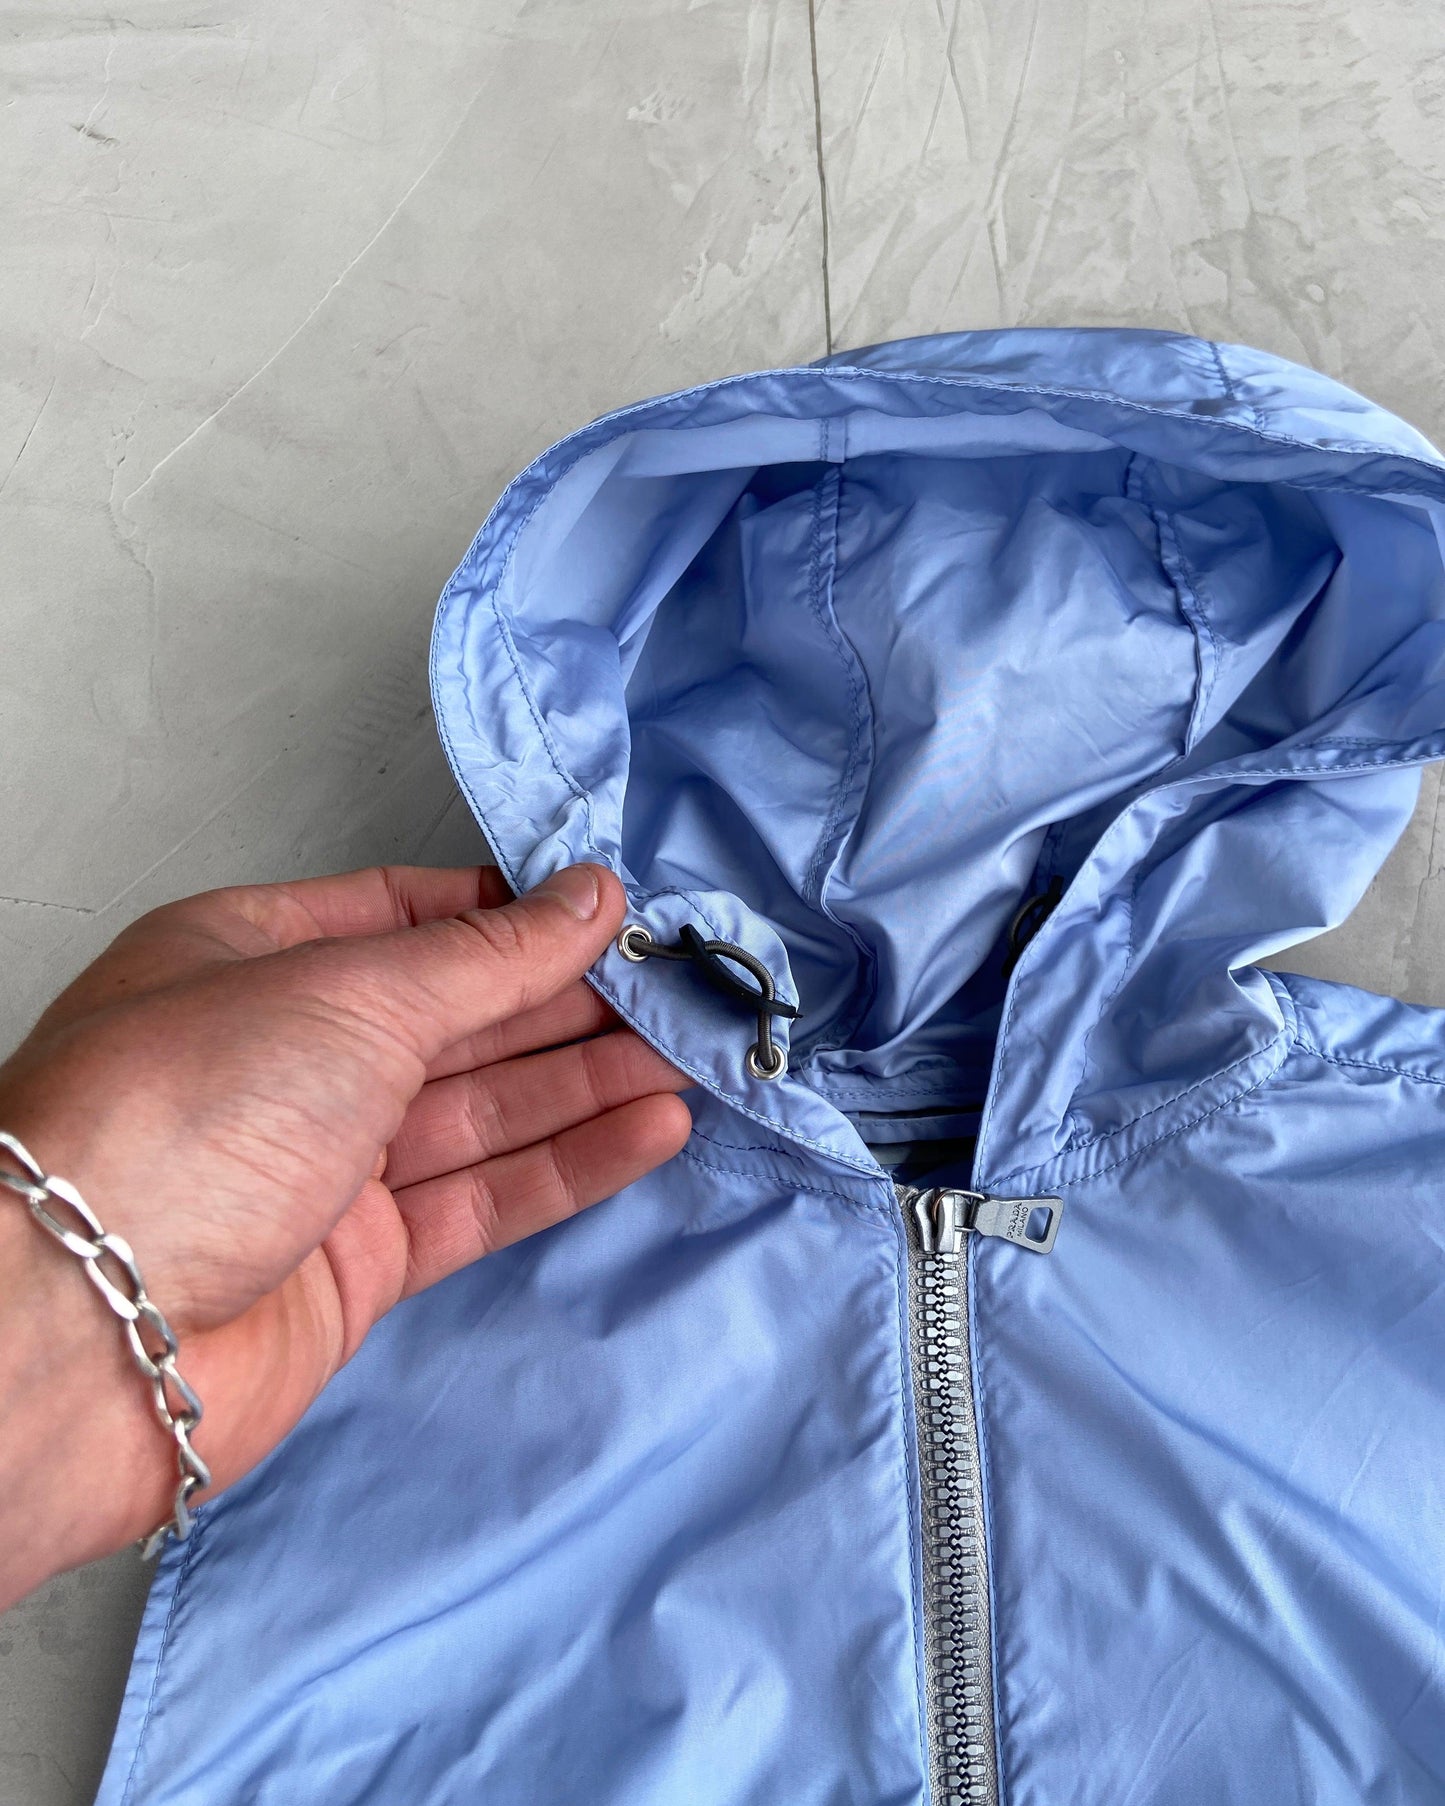 PRADA SS1999 BABY BLUE NYLON HOODED TOP - S/M - Known Source